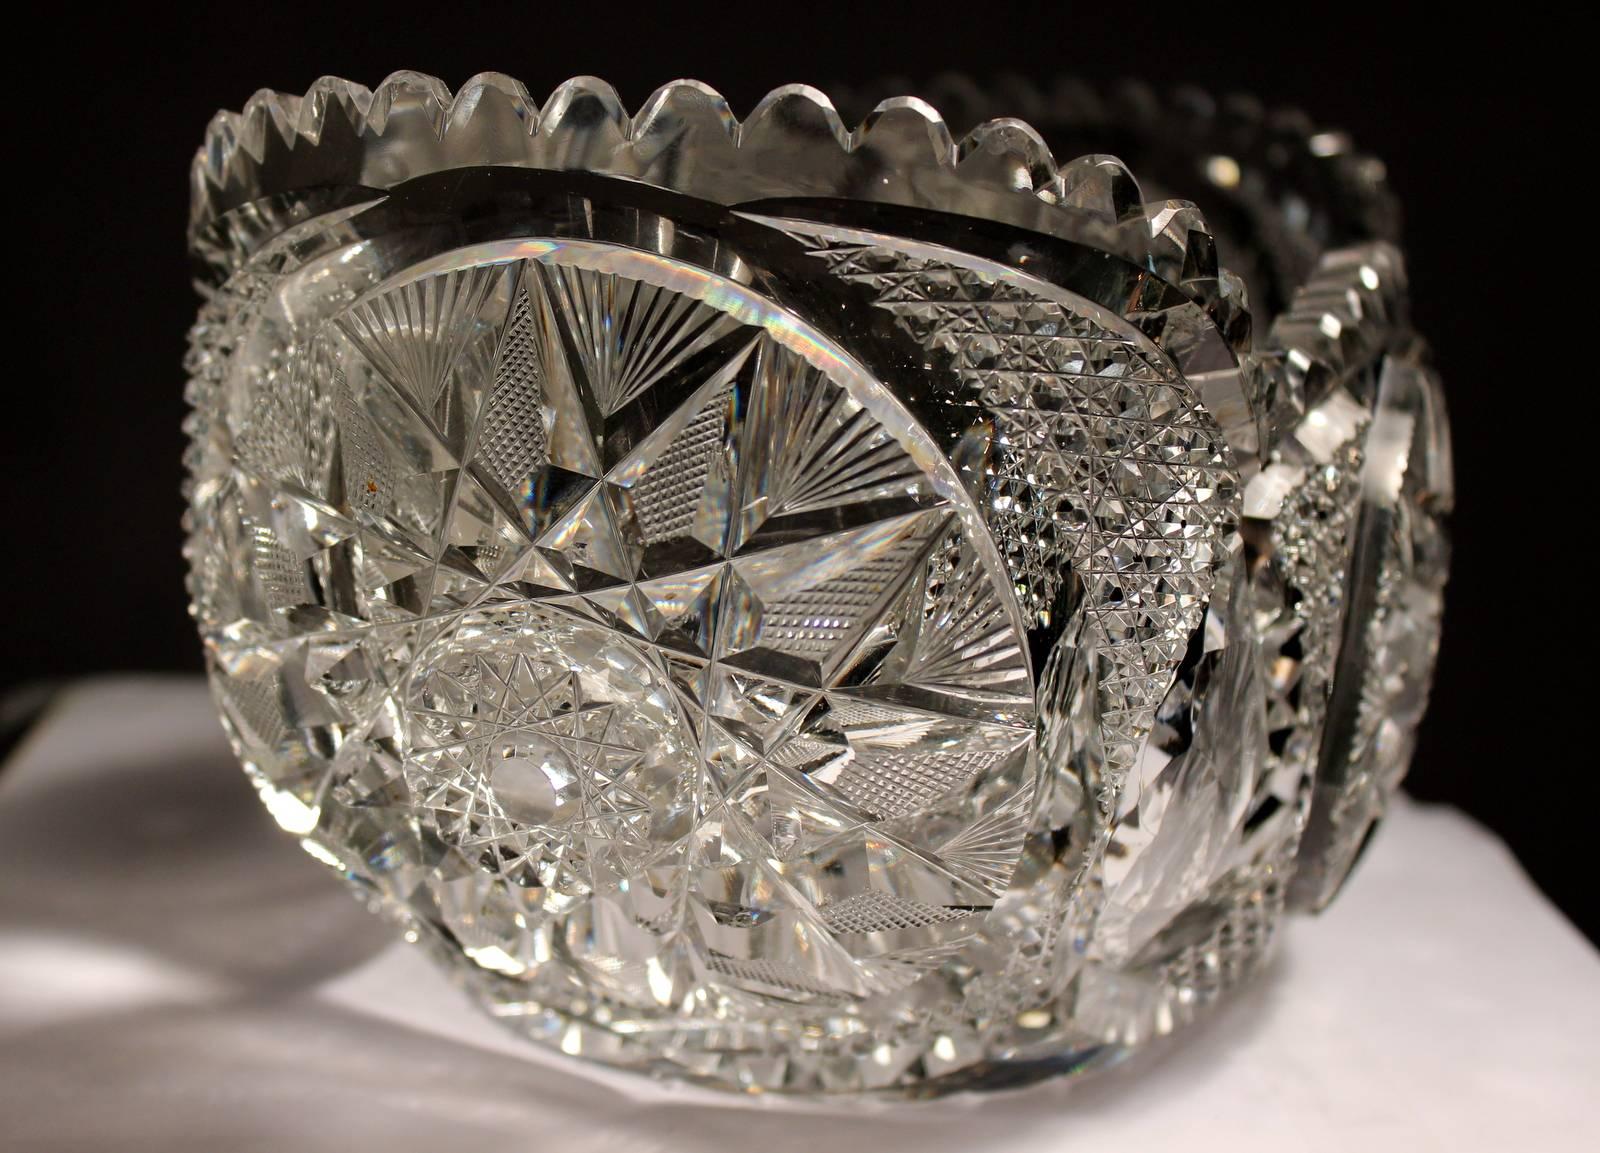 Extraordinary American brilliant period late 19th century heavy cut-glass center bowl. The deeply hand cut and polished pattern is the work of a master cutter of American brilliant mirror finish glass mainly from the coring New York area. The